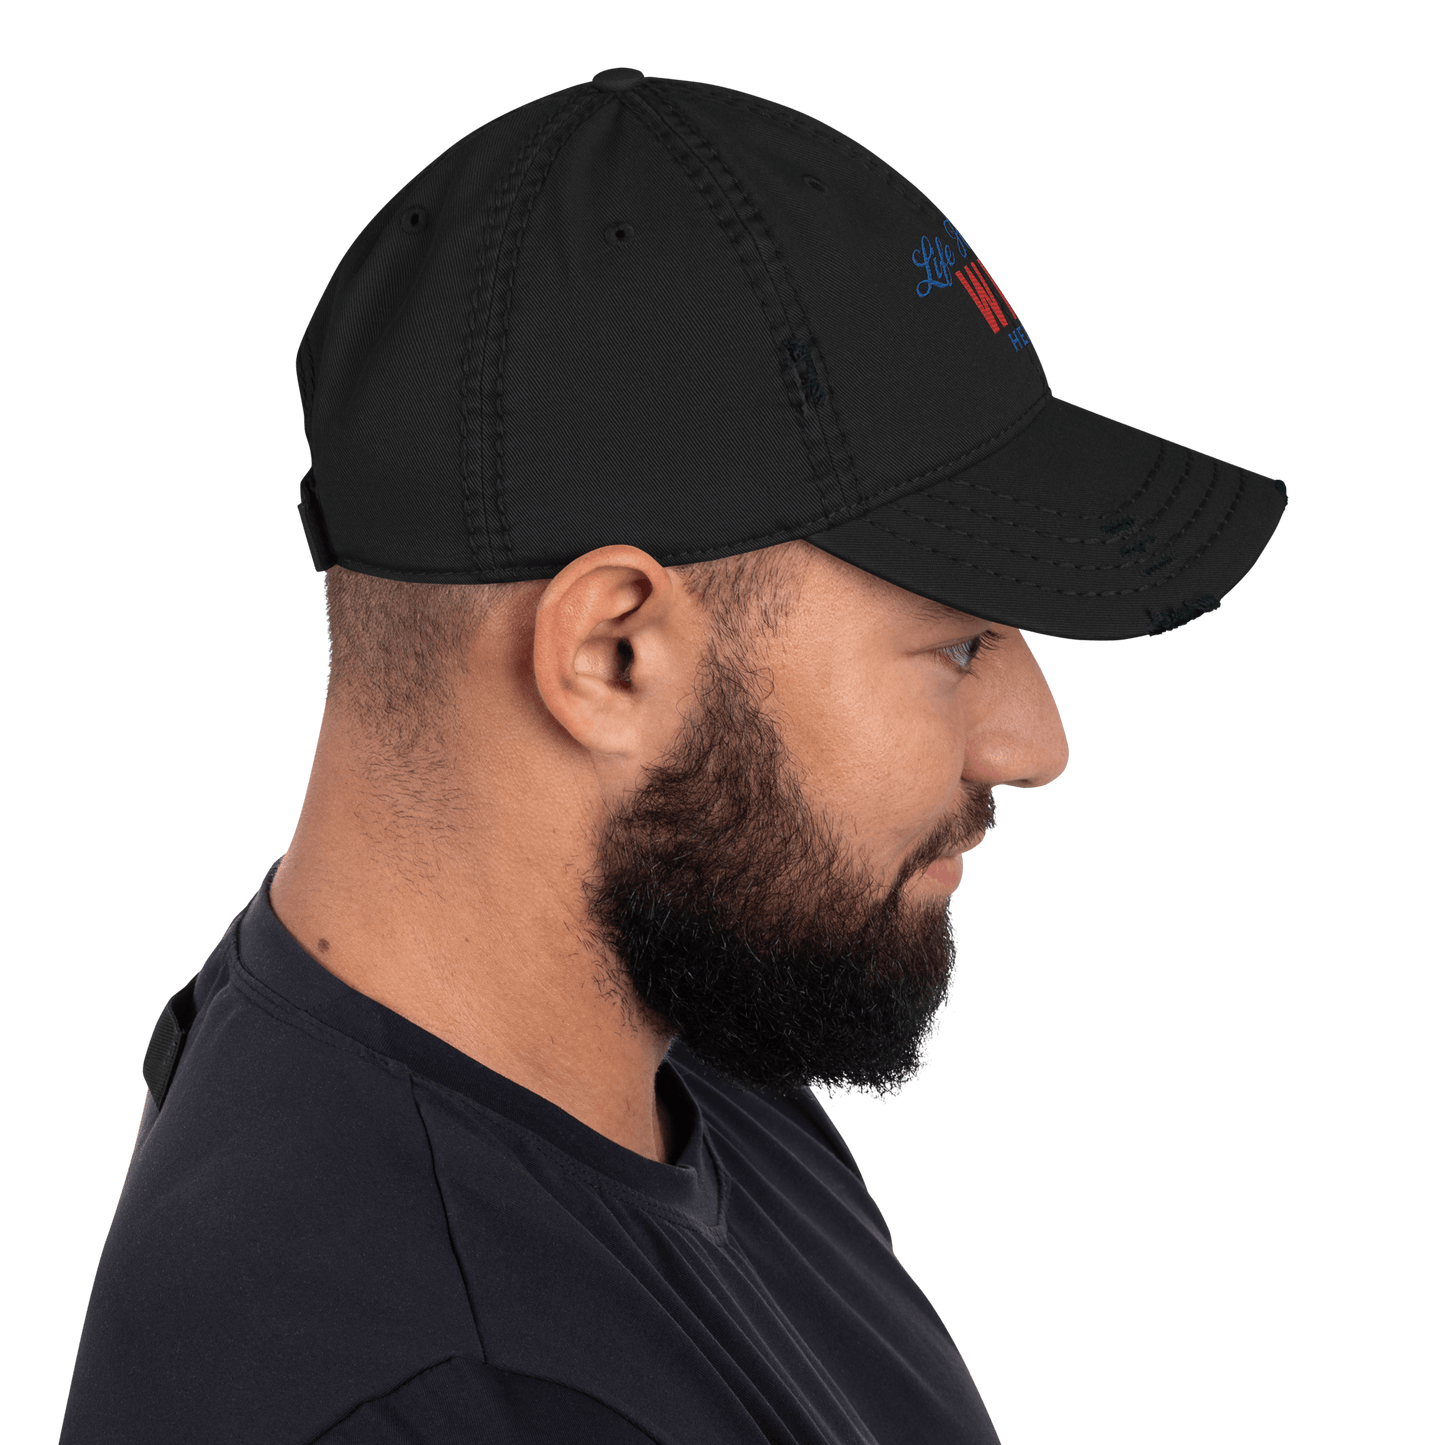 Life Happens Wine Helps Dad Hat - Add Edge to Your LookElevate your style with our "Life Happens Wine Helps" Dad Hat. Perfect for any occasion, blending humor and style. Ideal for drinking enthusiasts.